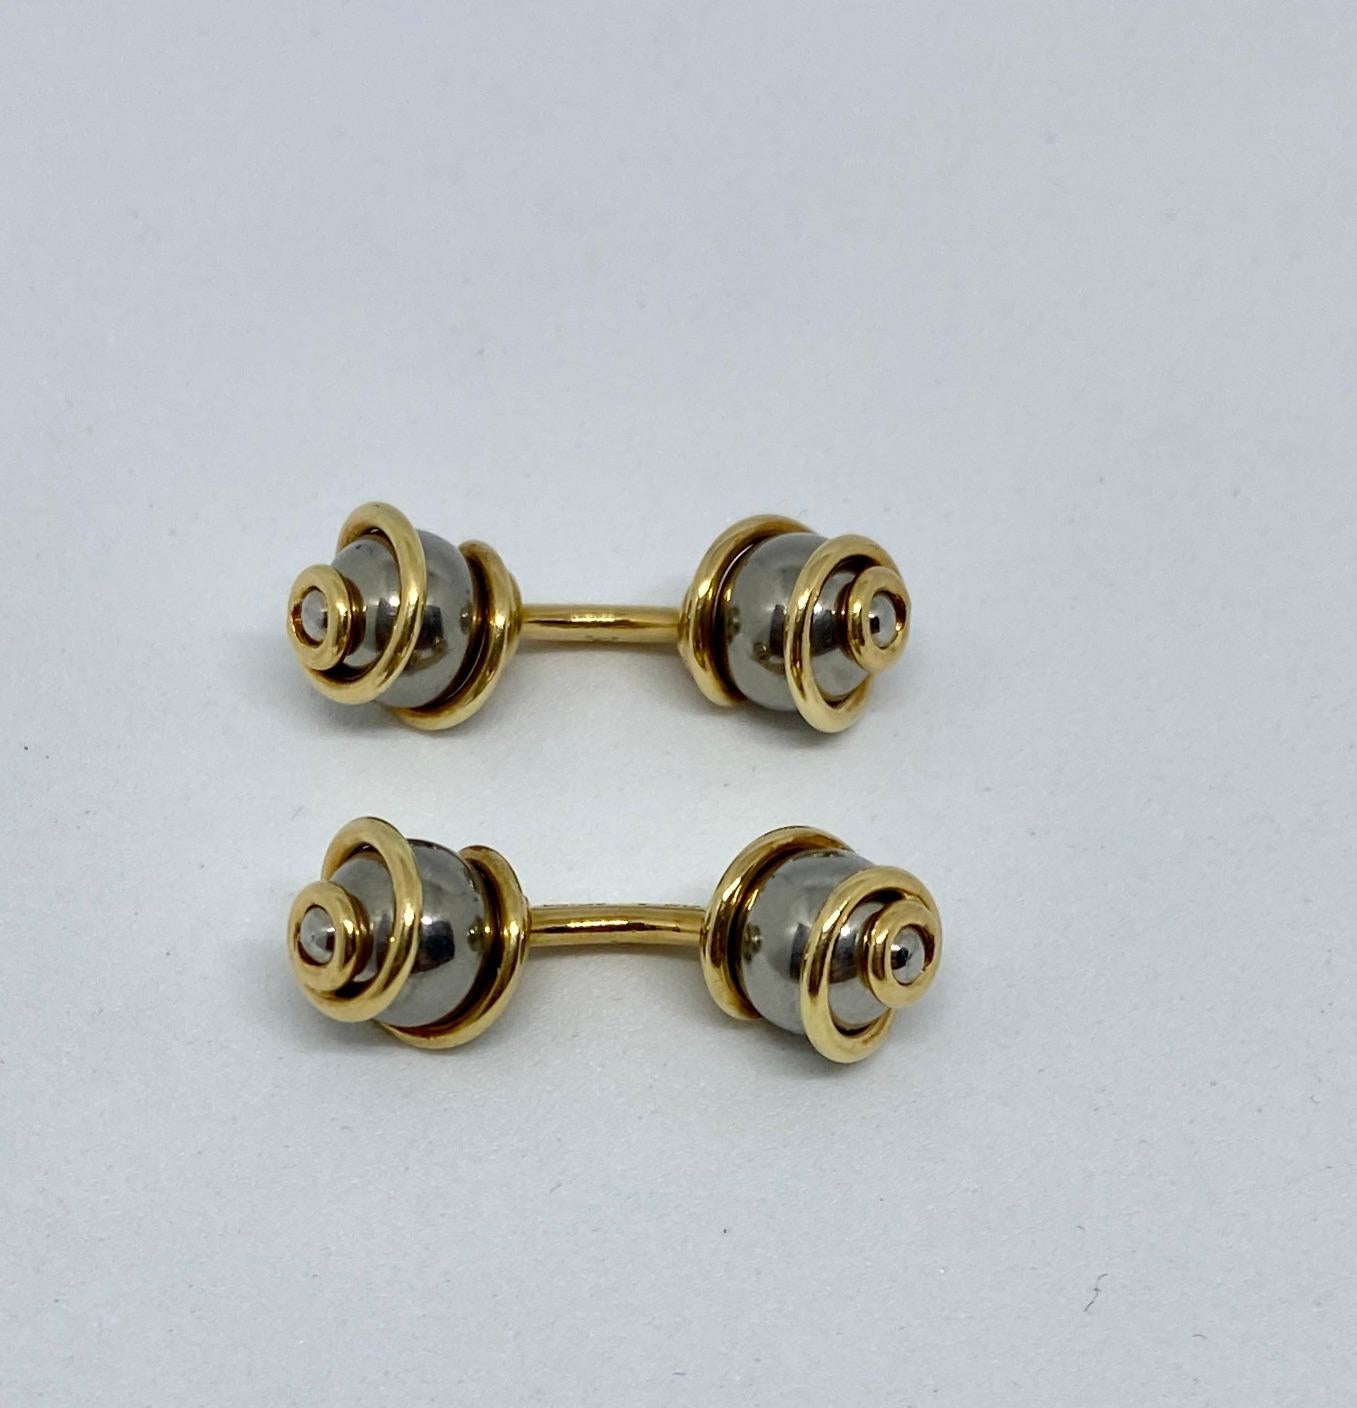 Fine and rare, these double-sided cufflinks were made in France from solid 18K yellow gold and retailed by Louis Vuitton.

Both cufflinks bear the 